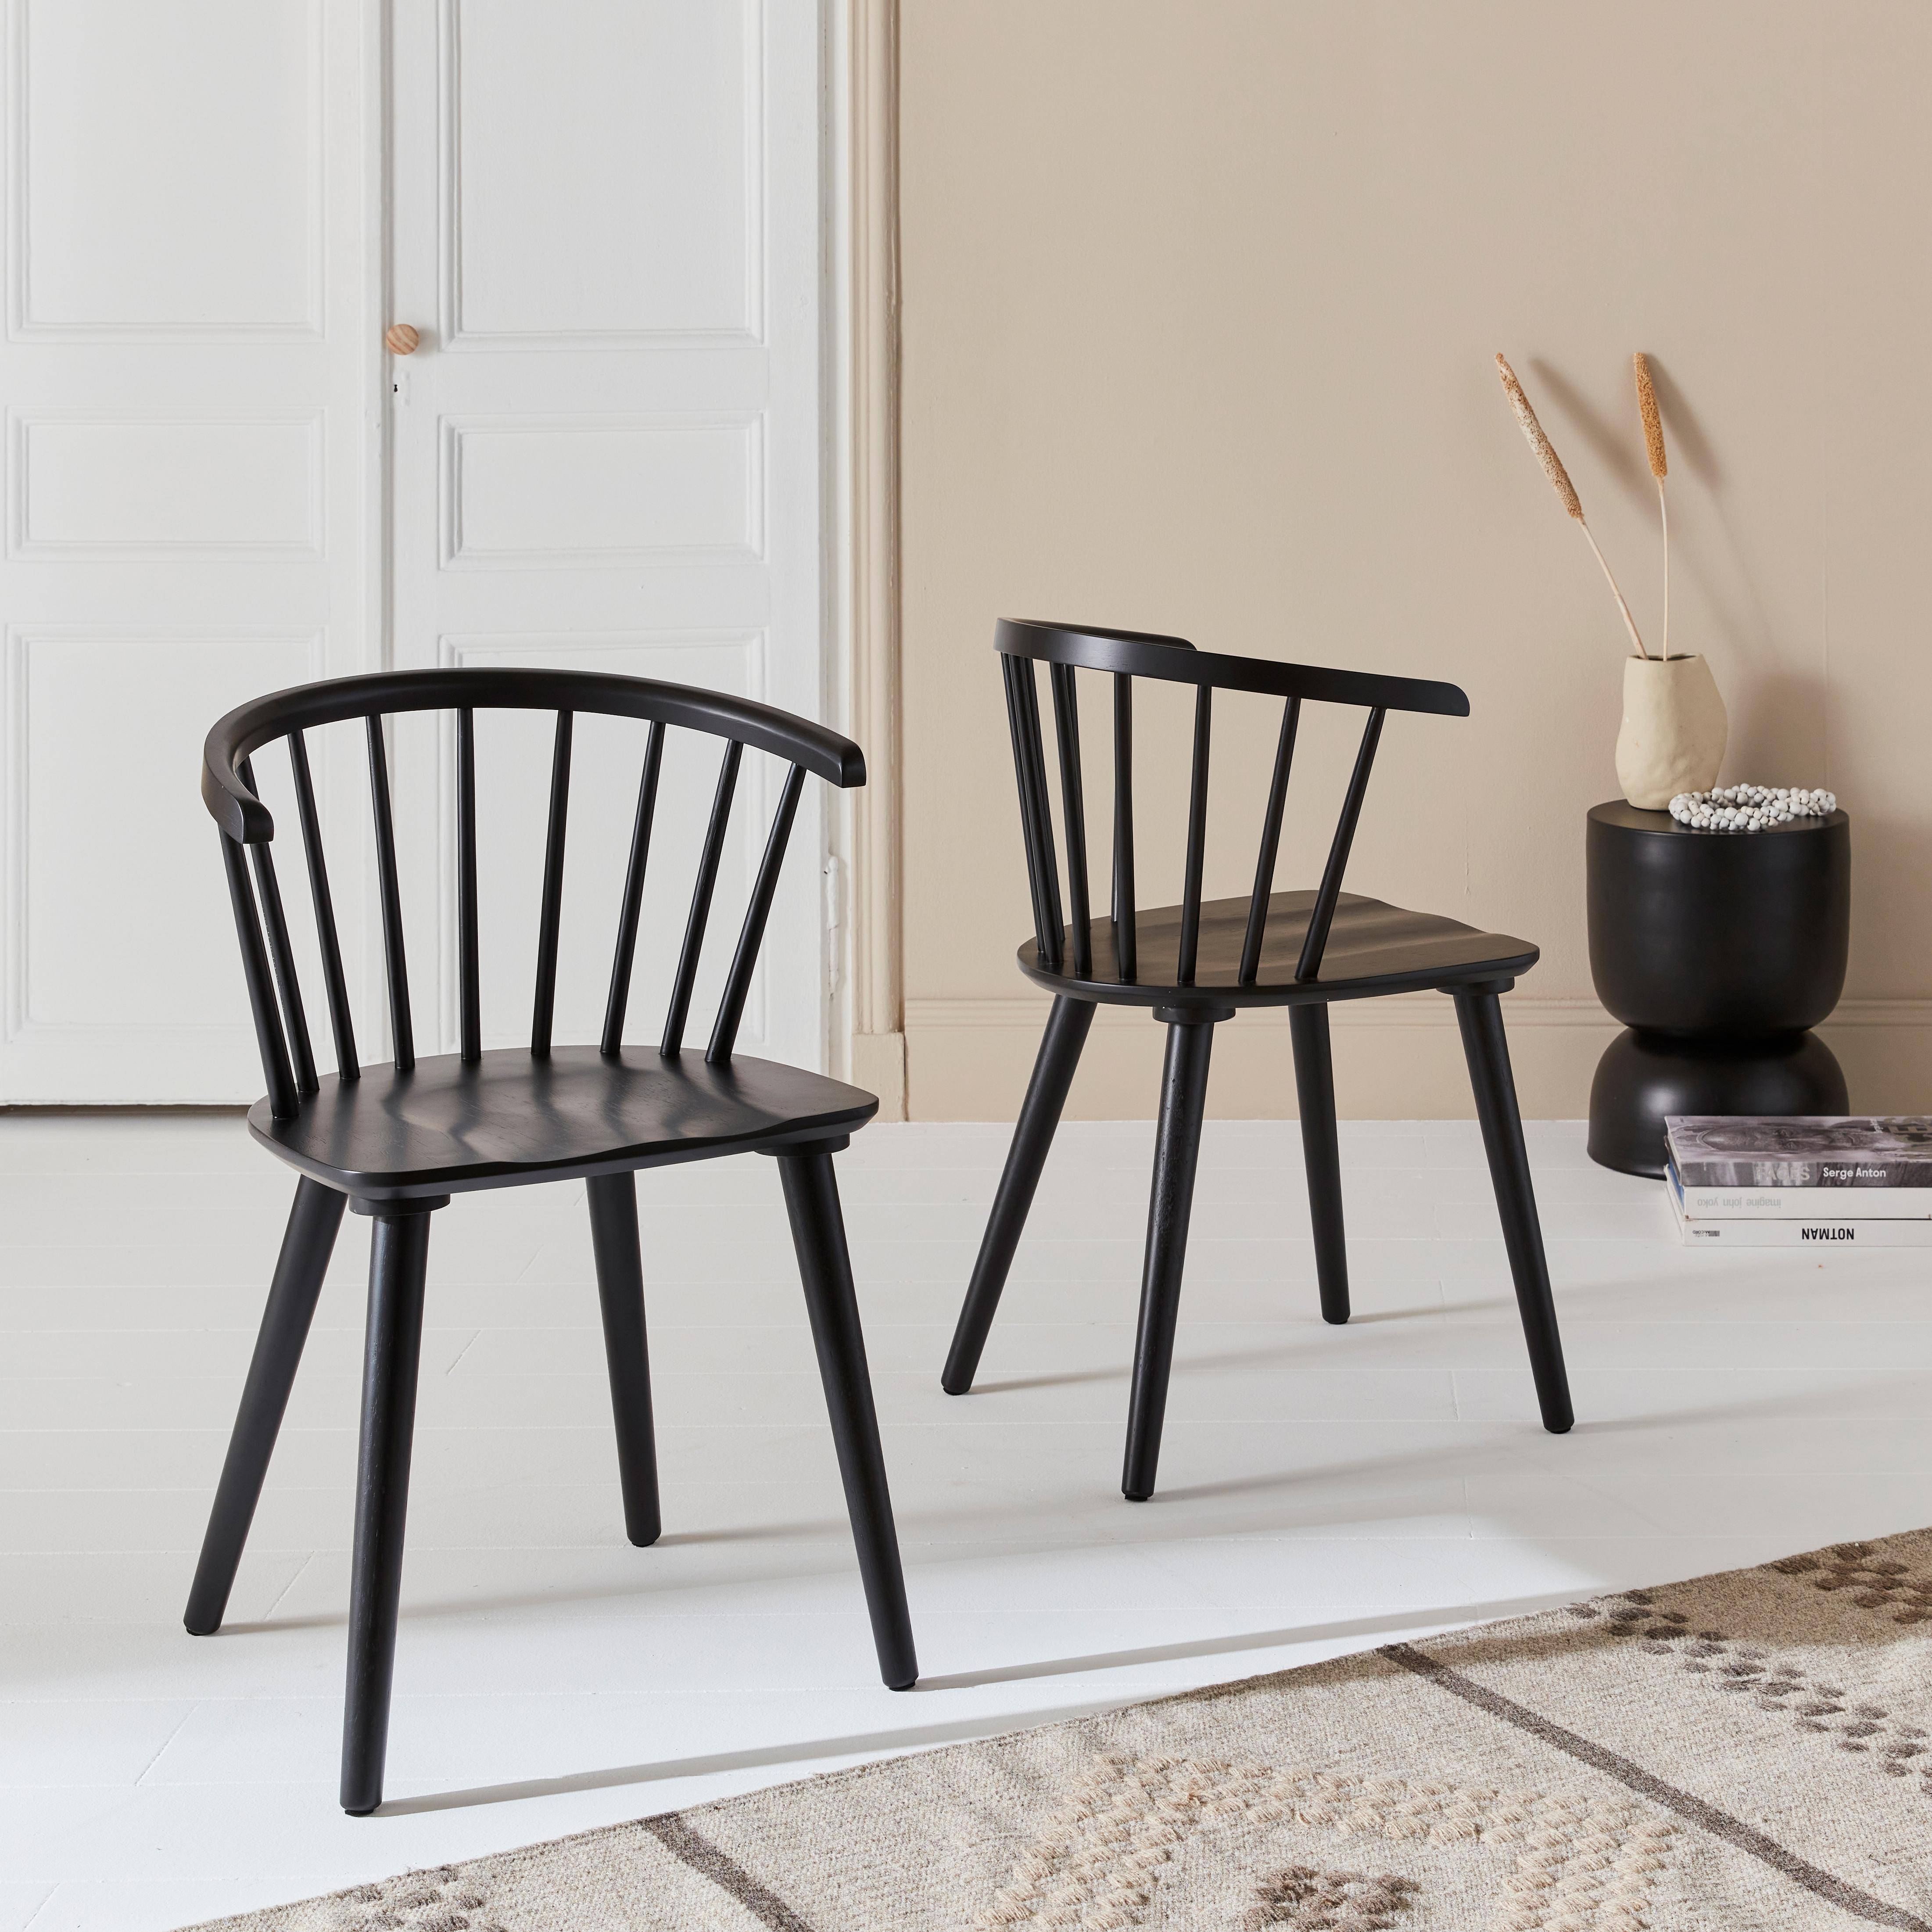 Pair of  Wood and Plywood Spindle Chairs, black, L53 x W47.5 x H76cm ,sweeek,Photo2